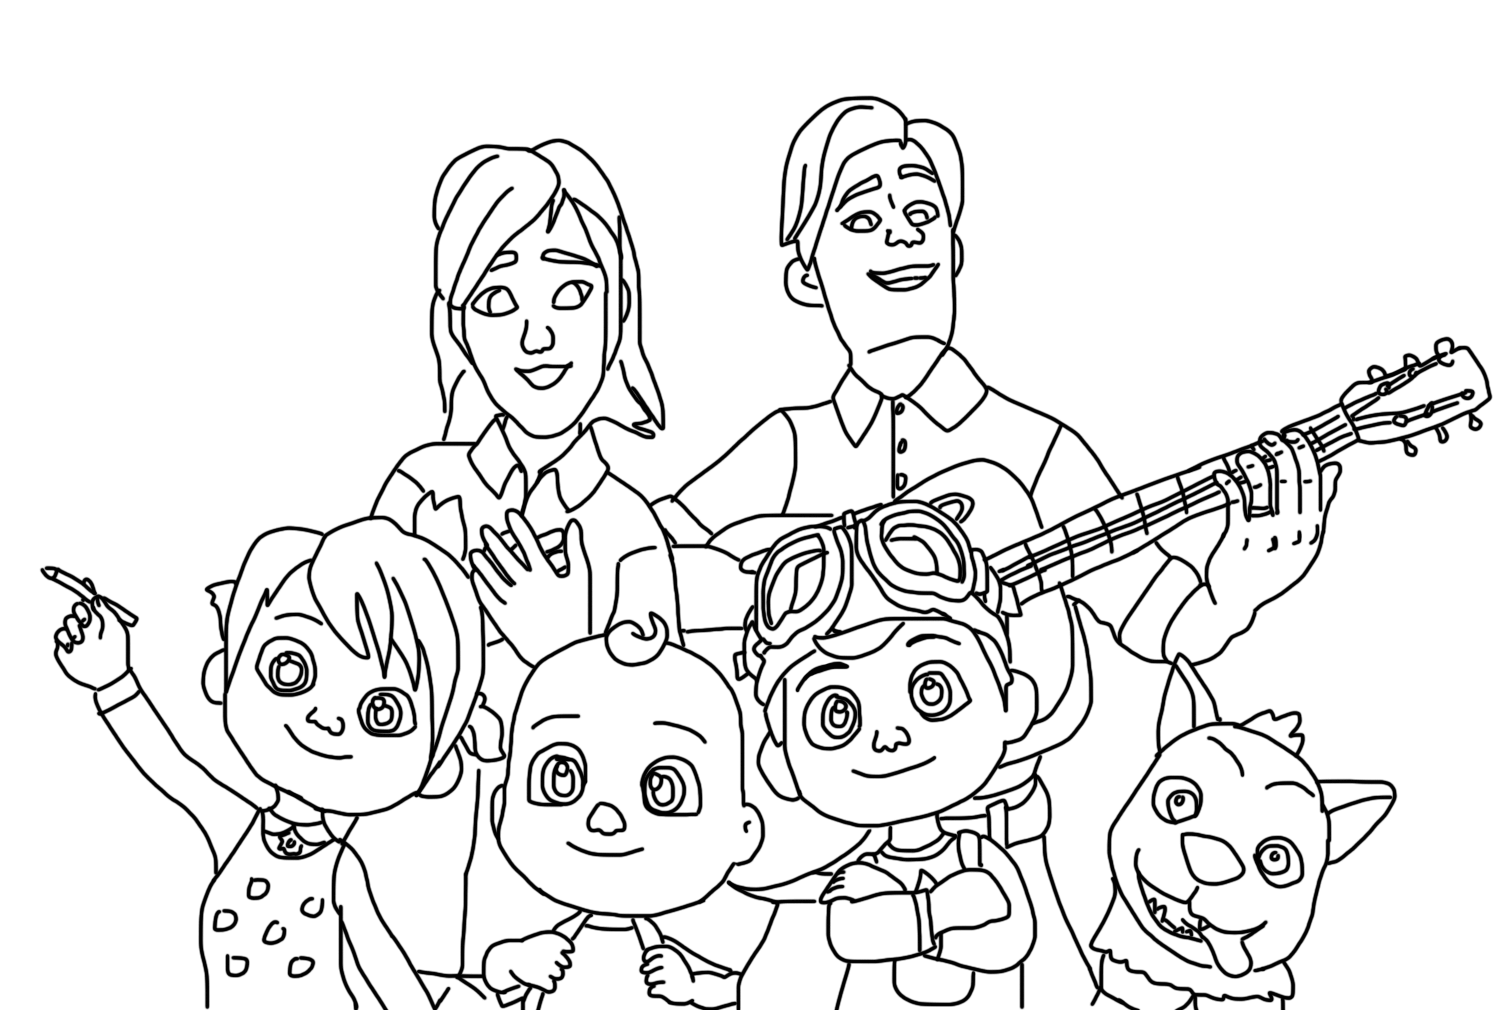 Coloring Pages Cocomelon from Cocomelon